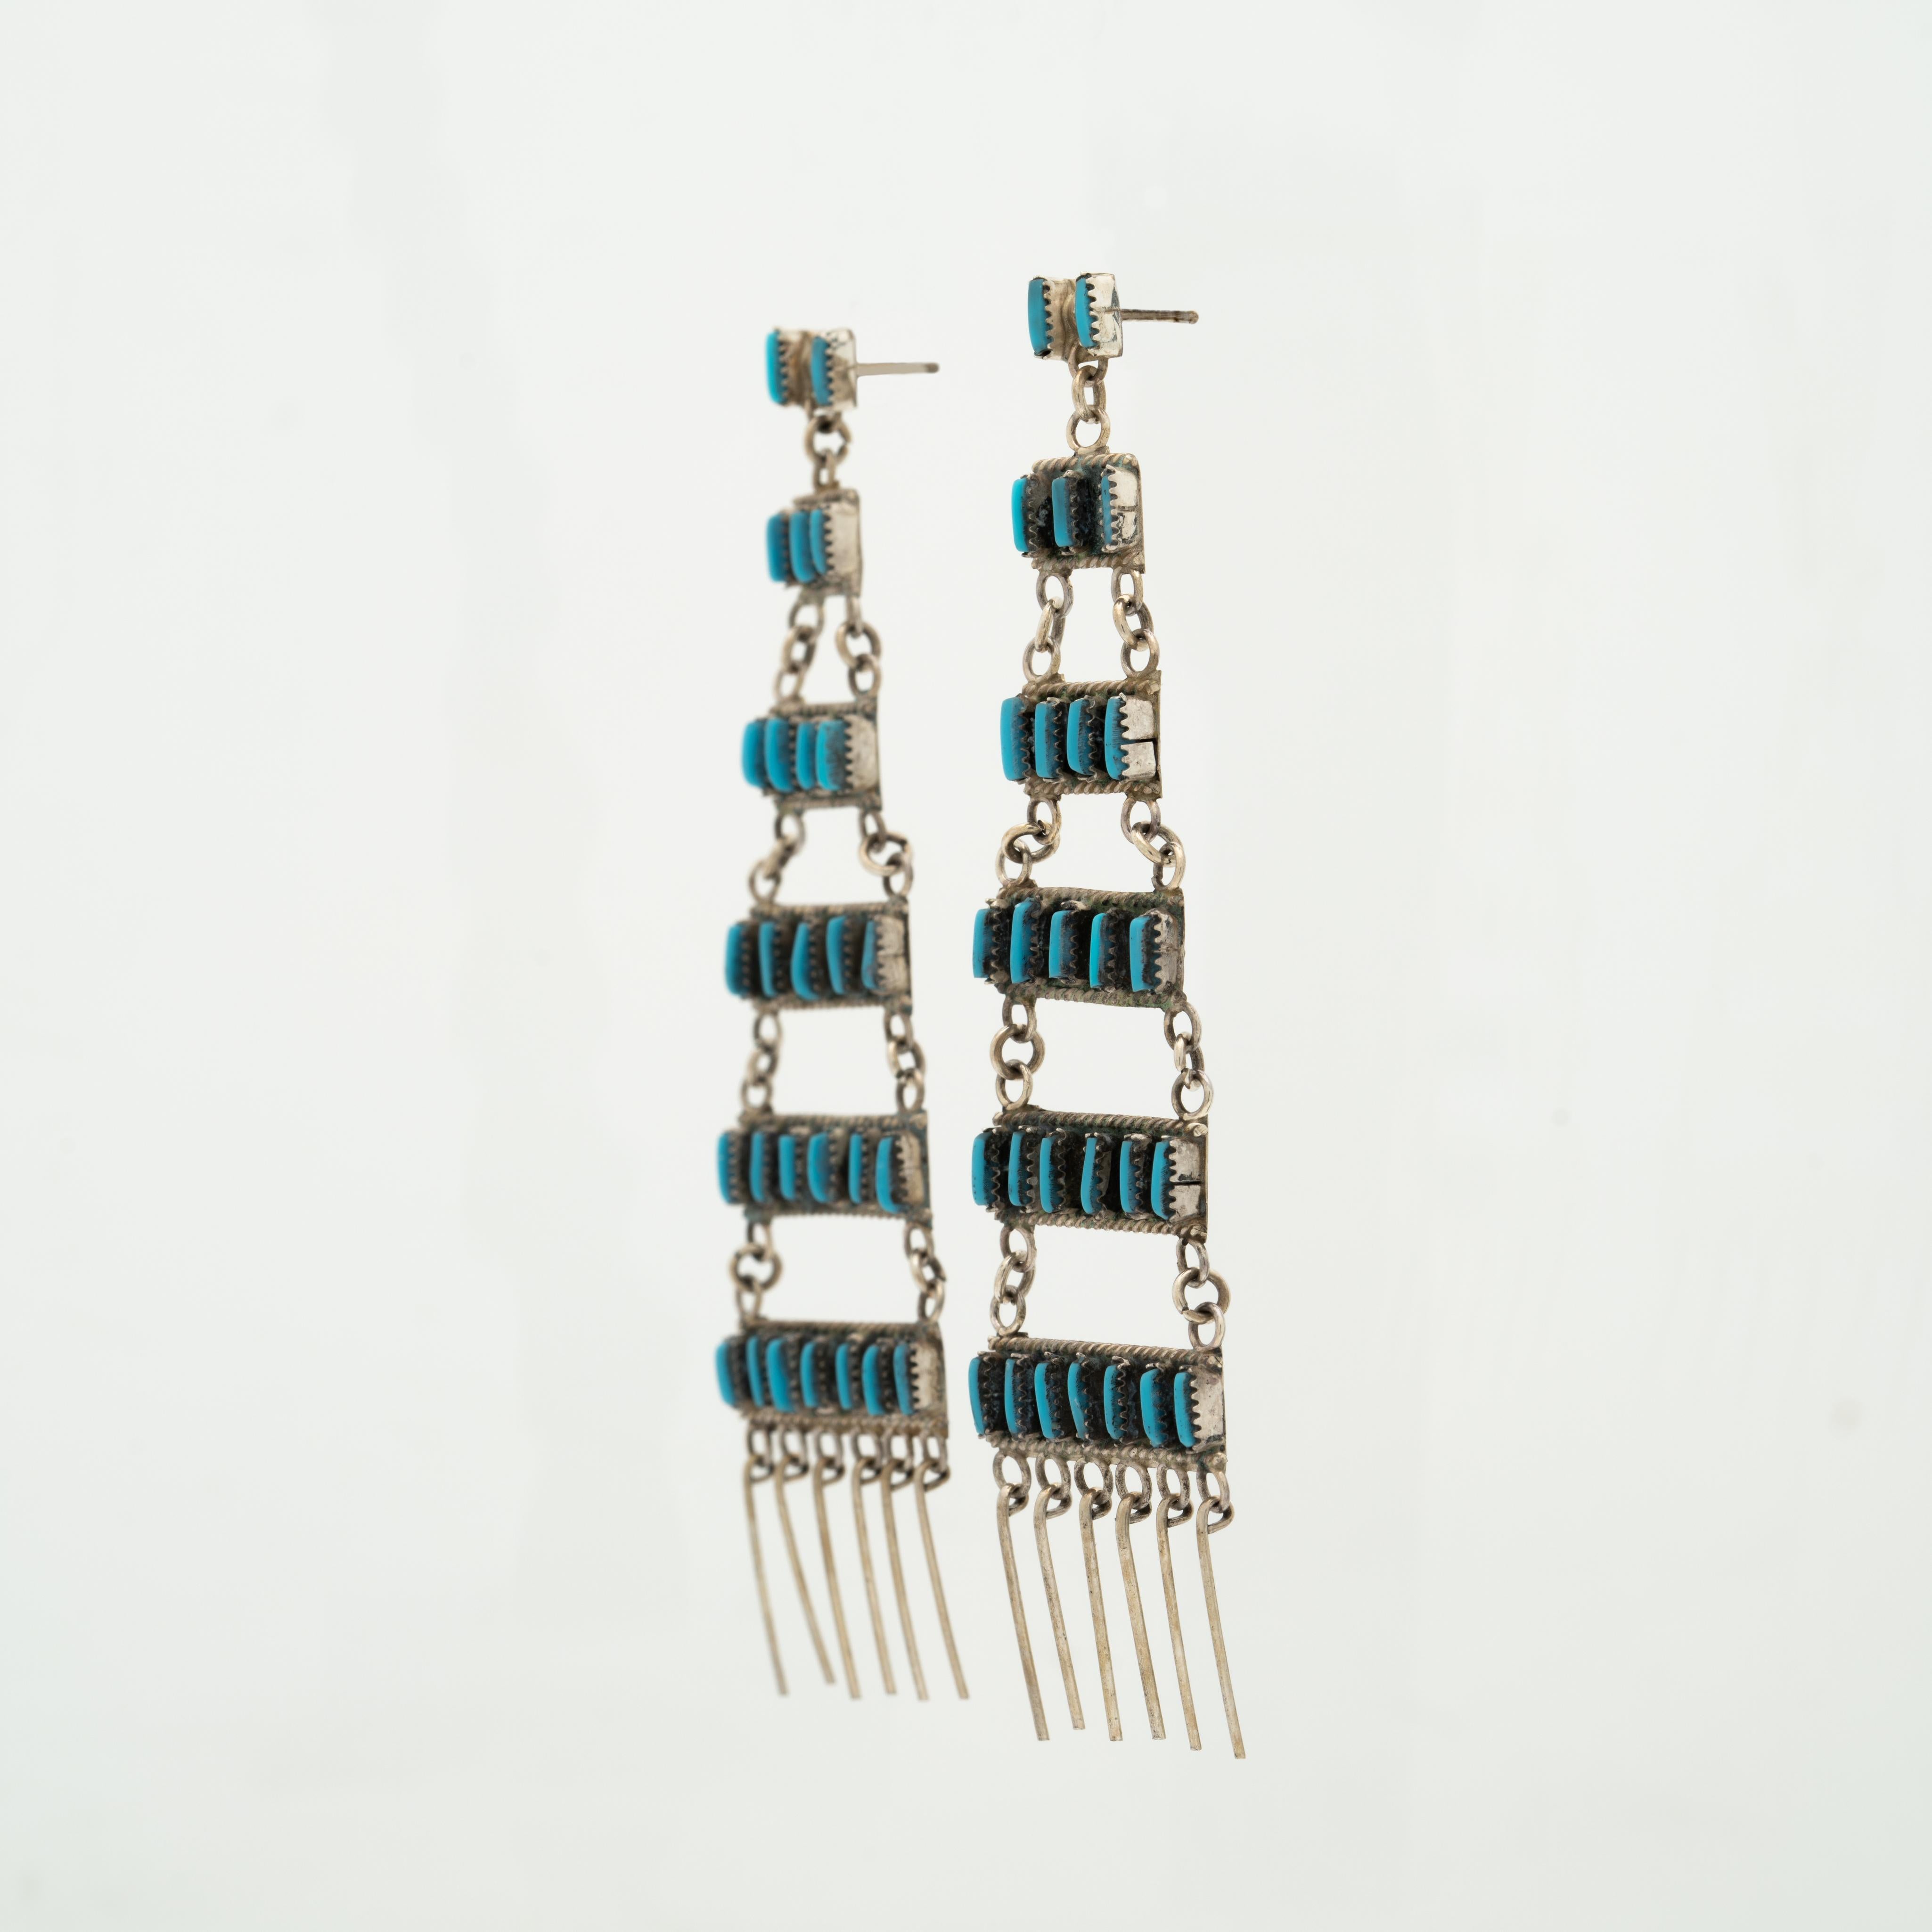 Native American Vintage Zuni Sterling Silver and Turquoise Fringe Long Chandelier Earrings c. 1970s

Length and width: 99.4mm x25mm
Weight per earring: 6.1 grams

c.1970's